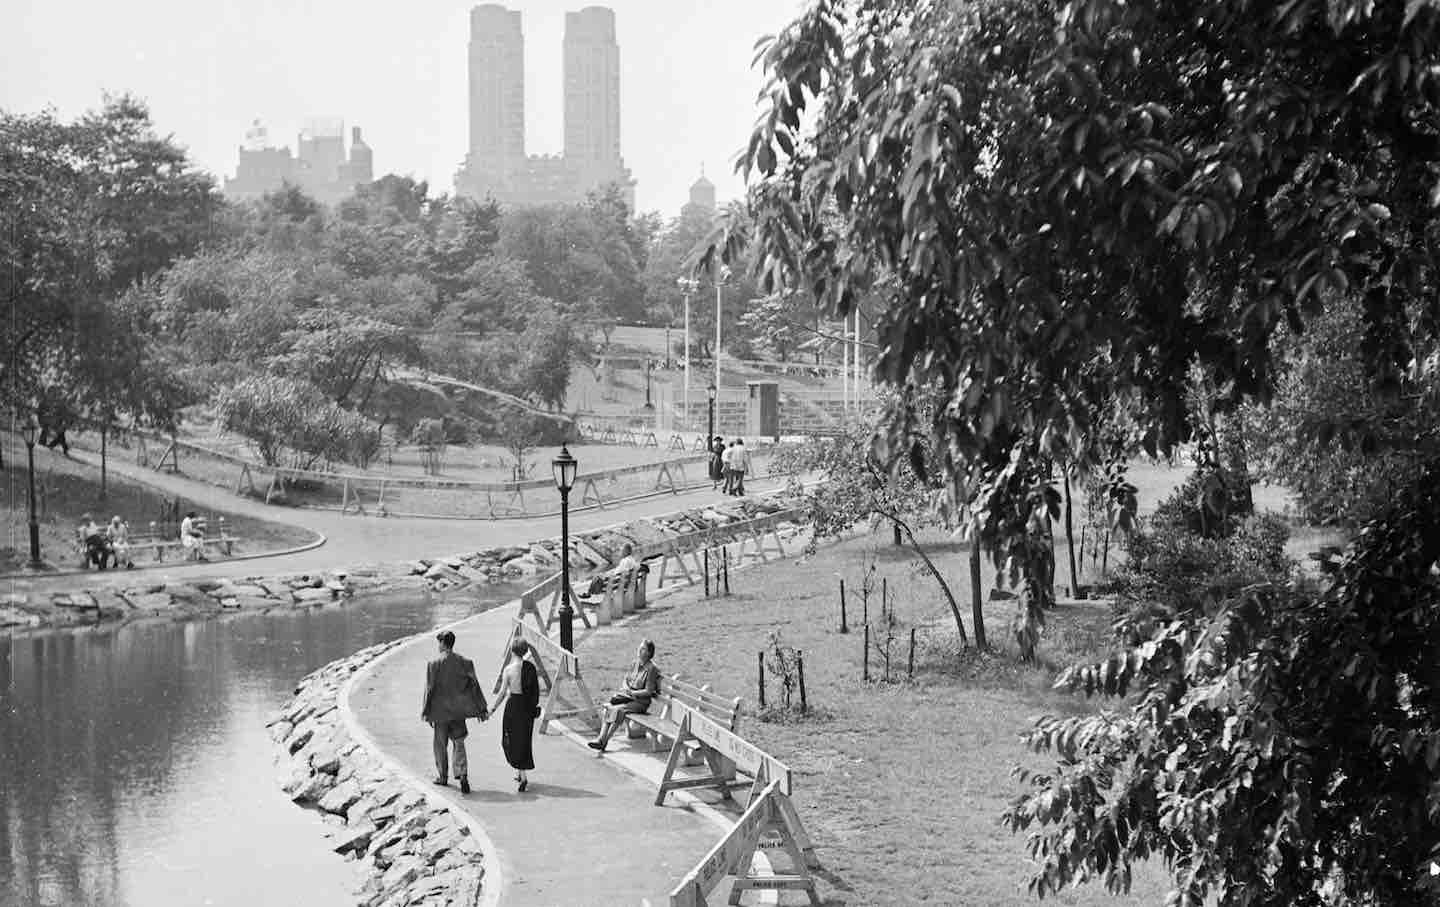 Families walking in a New York park, 1952.